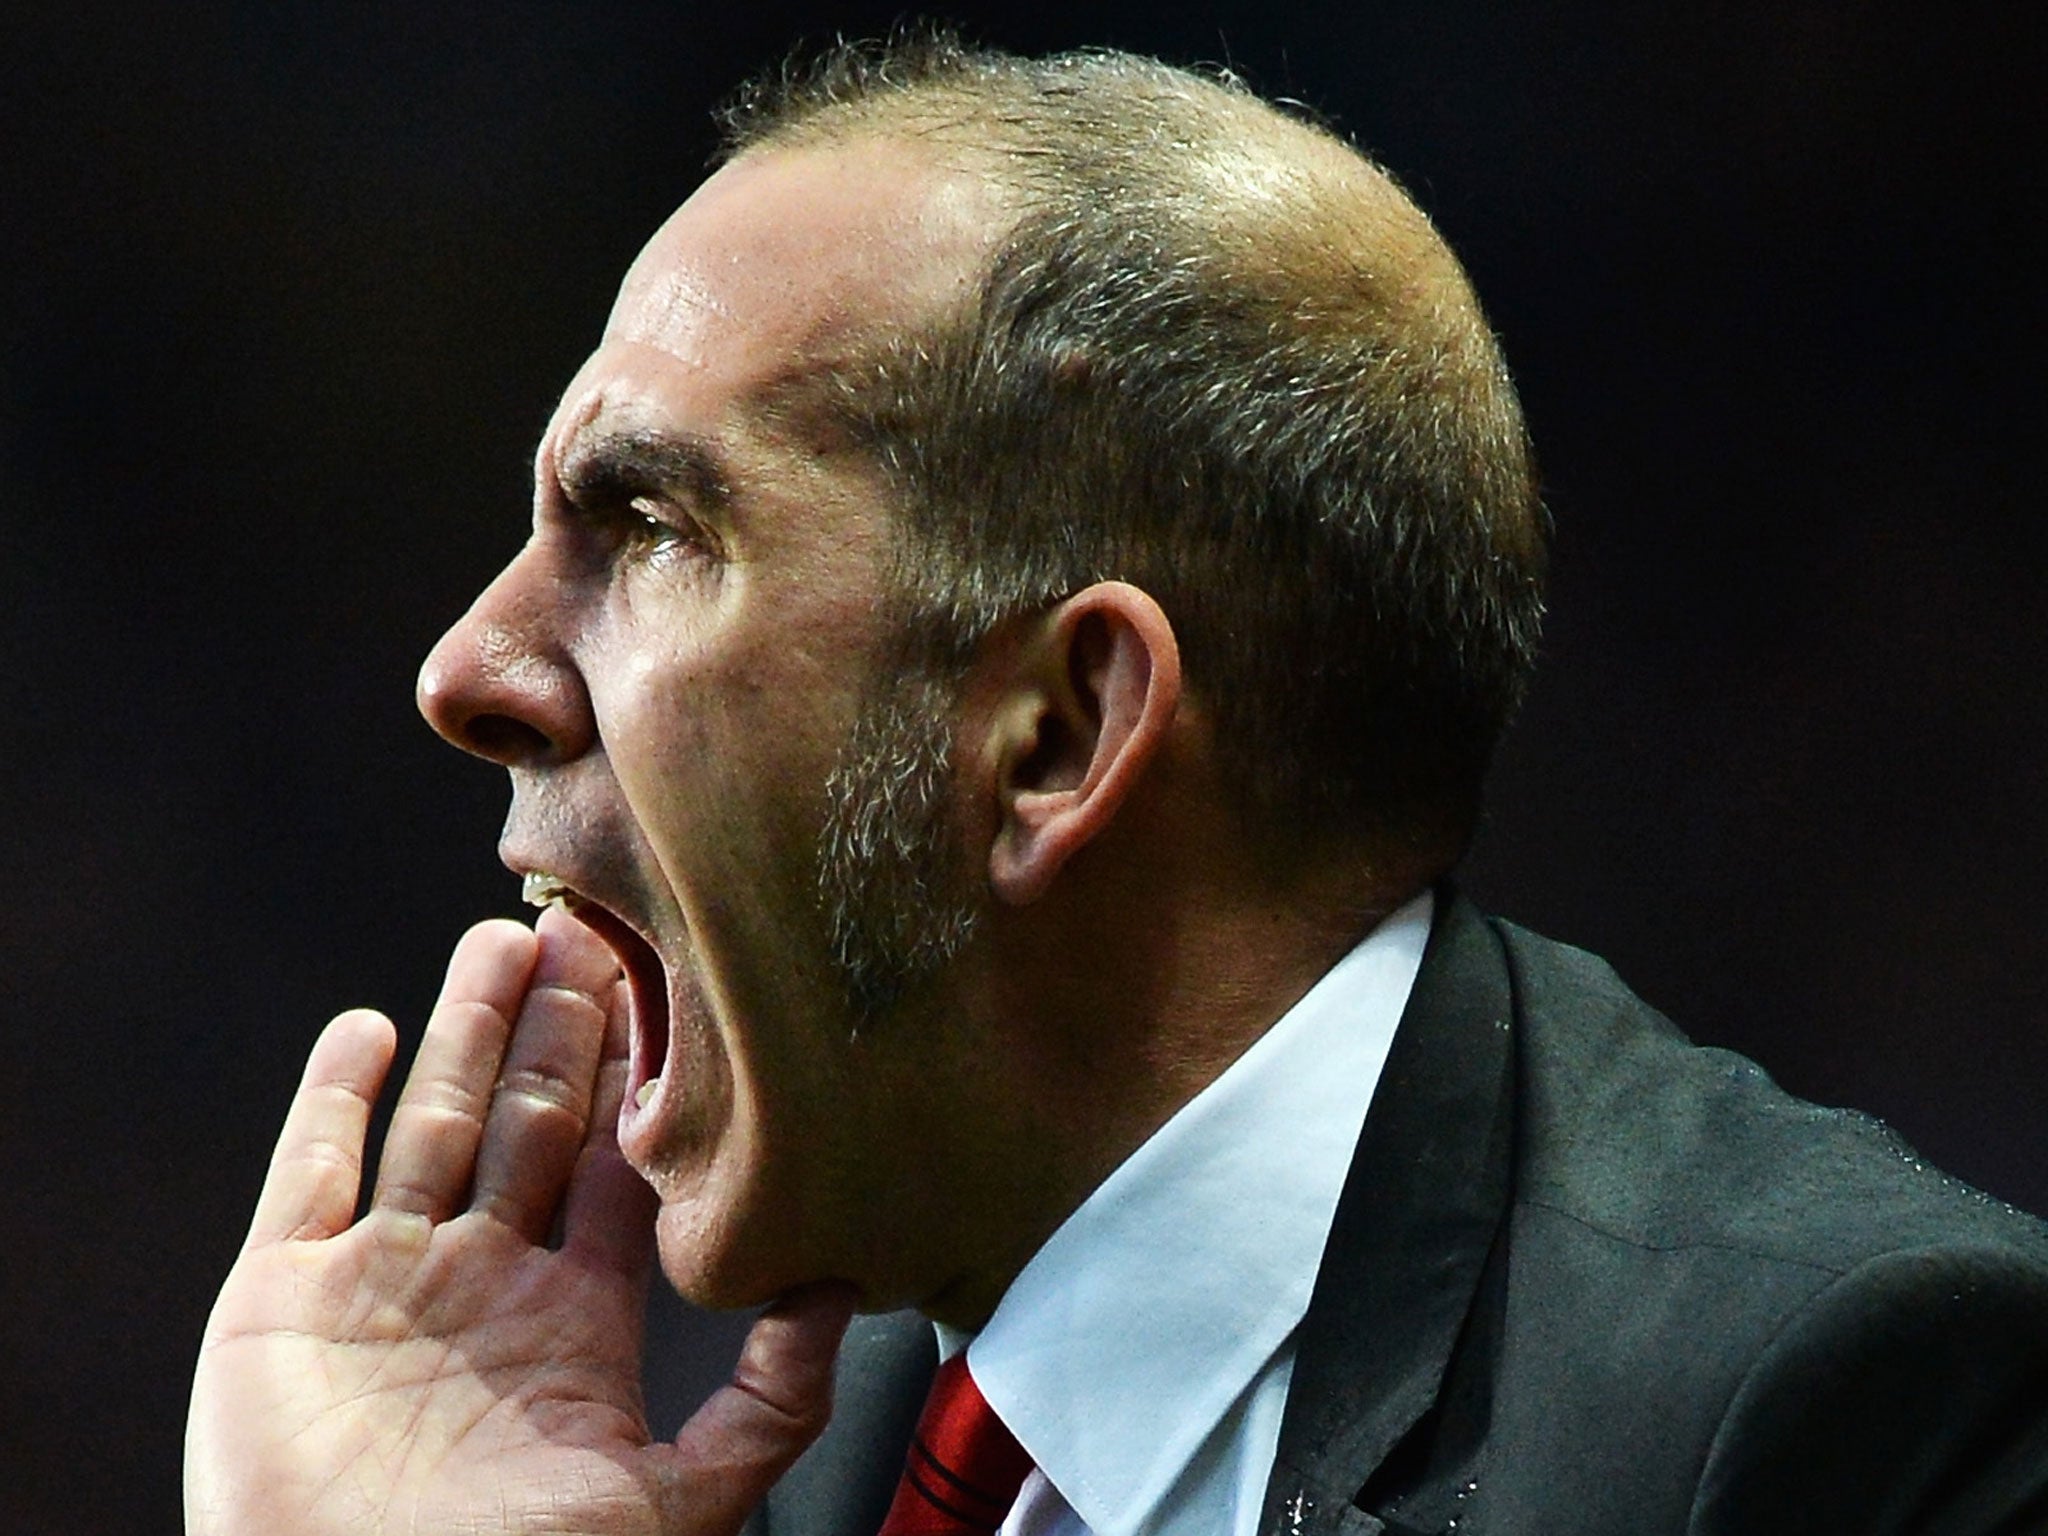 Paolo Di Canio’s Sunderland host Stoke tonight in a crucial game for his club